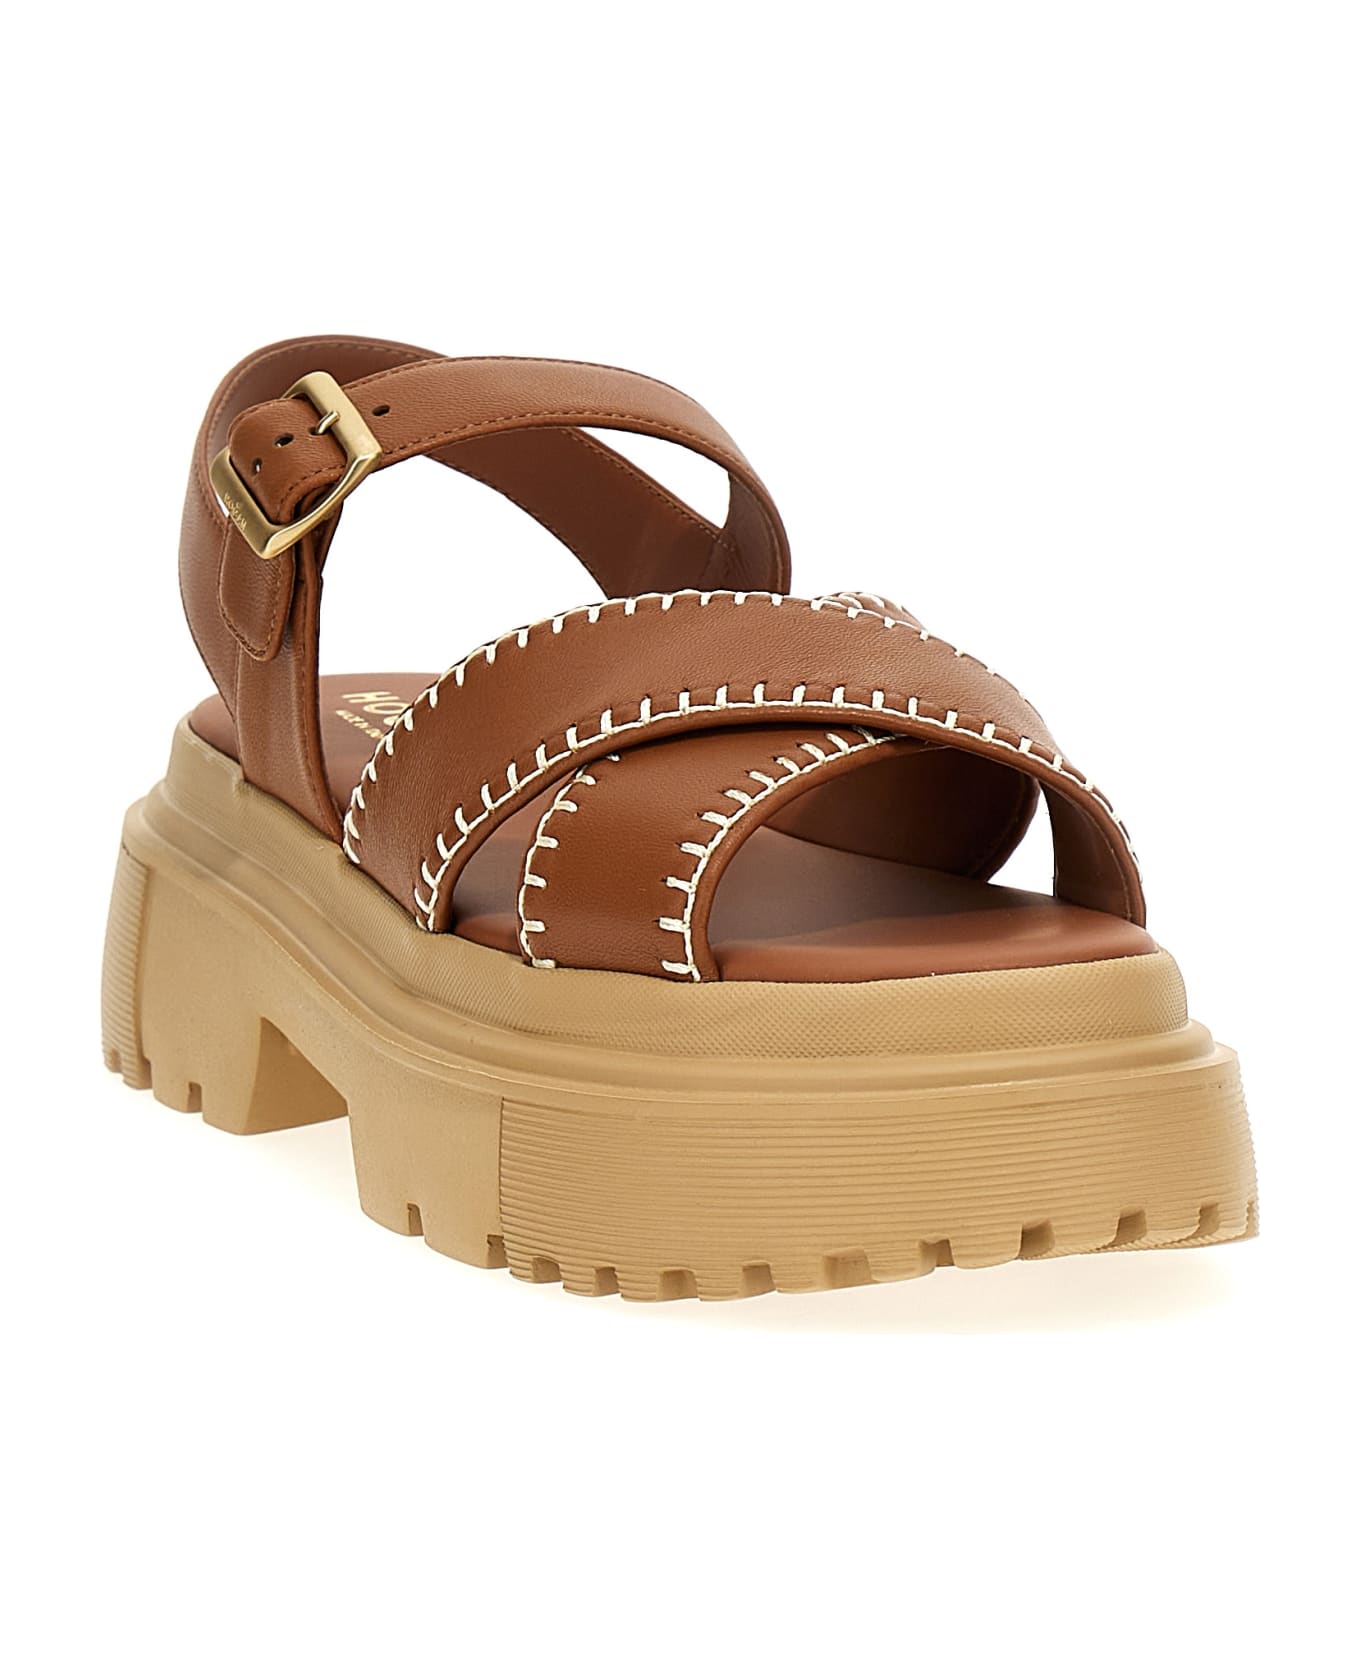 Hogan Leather Sandals - Leather Brown